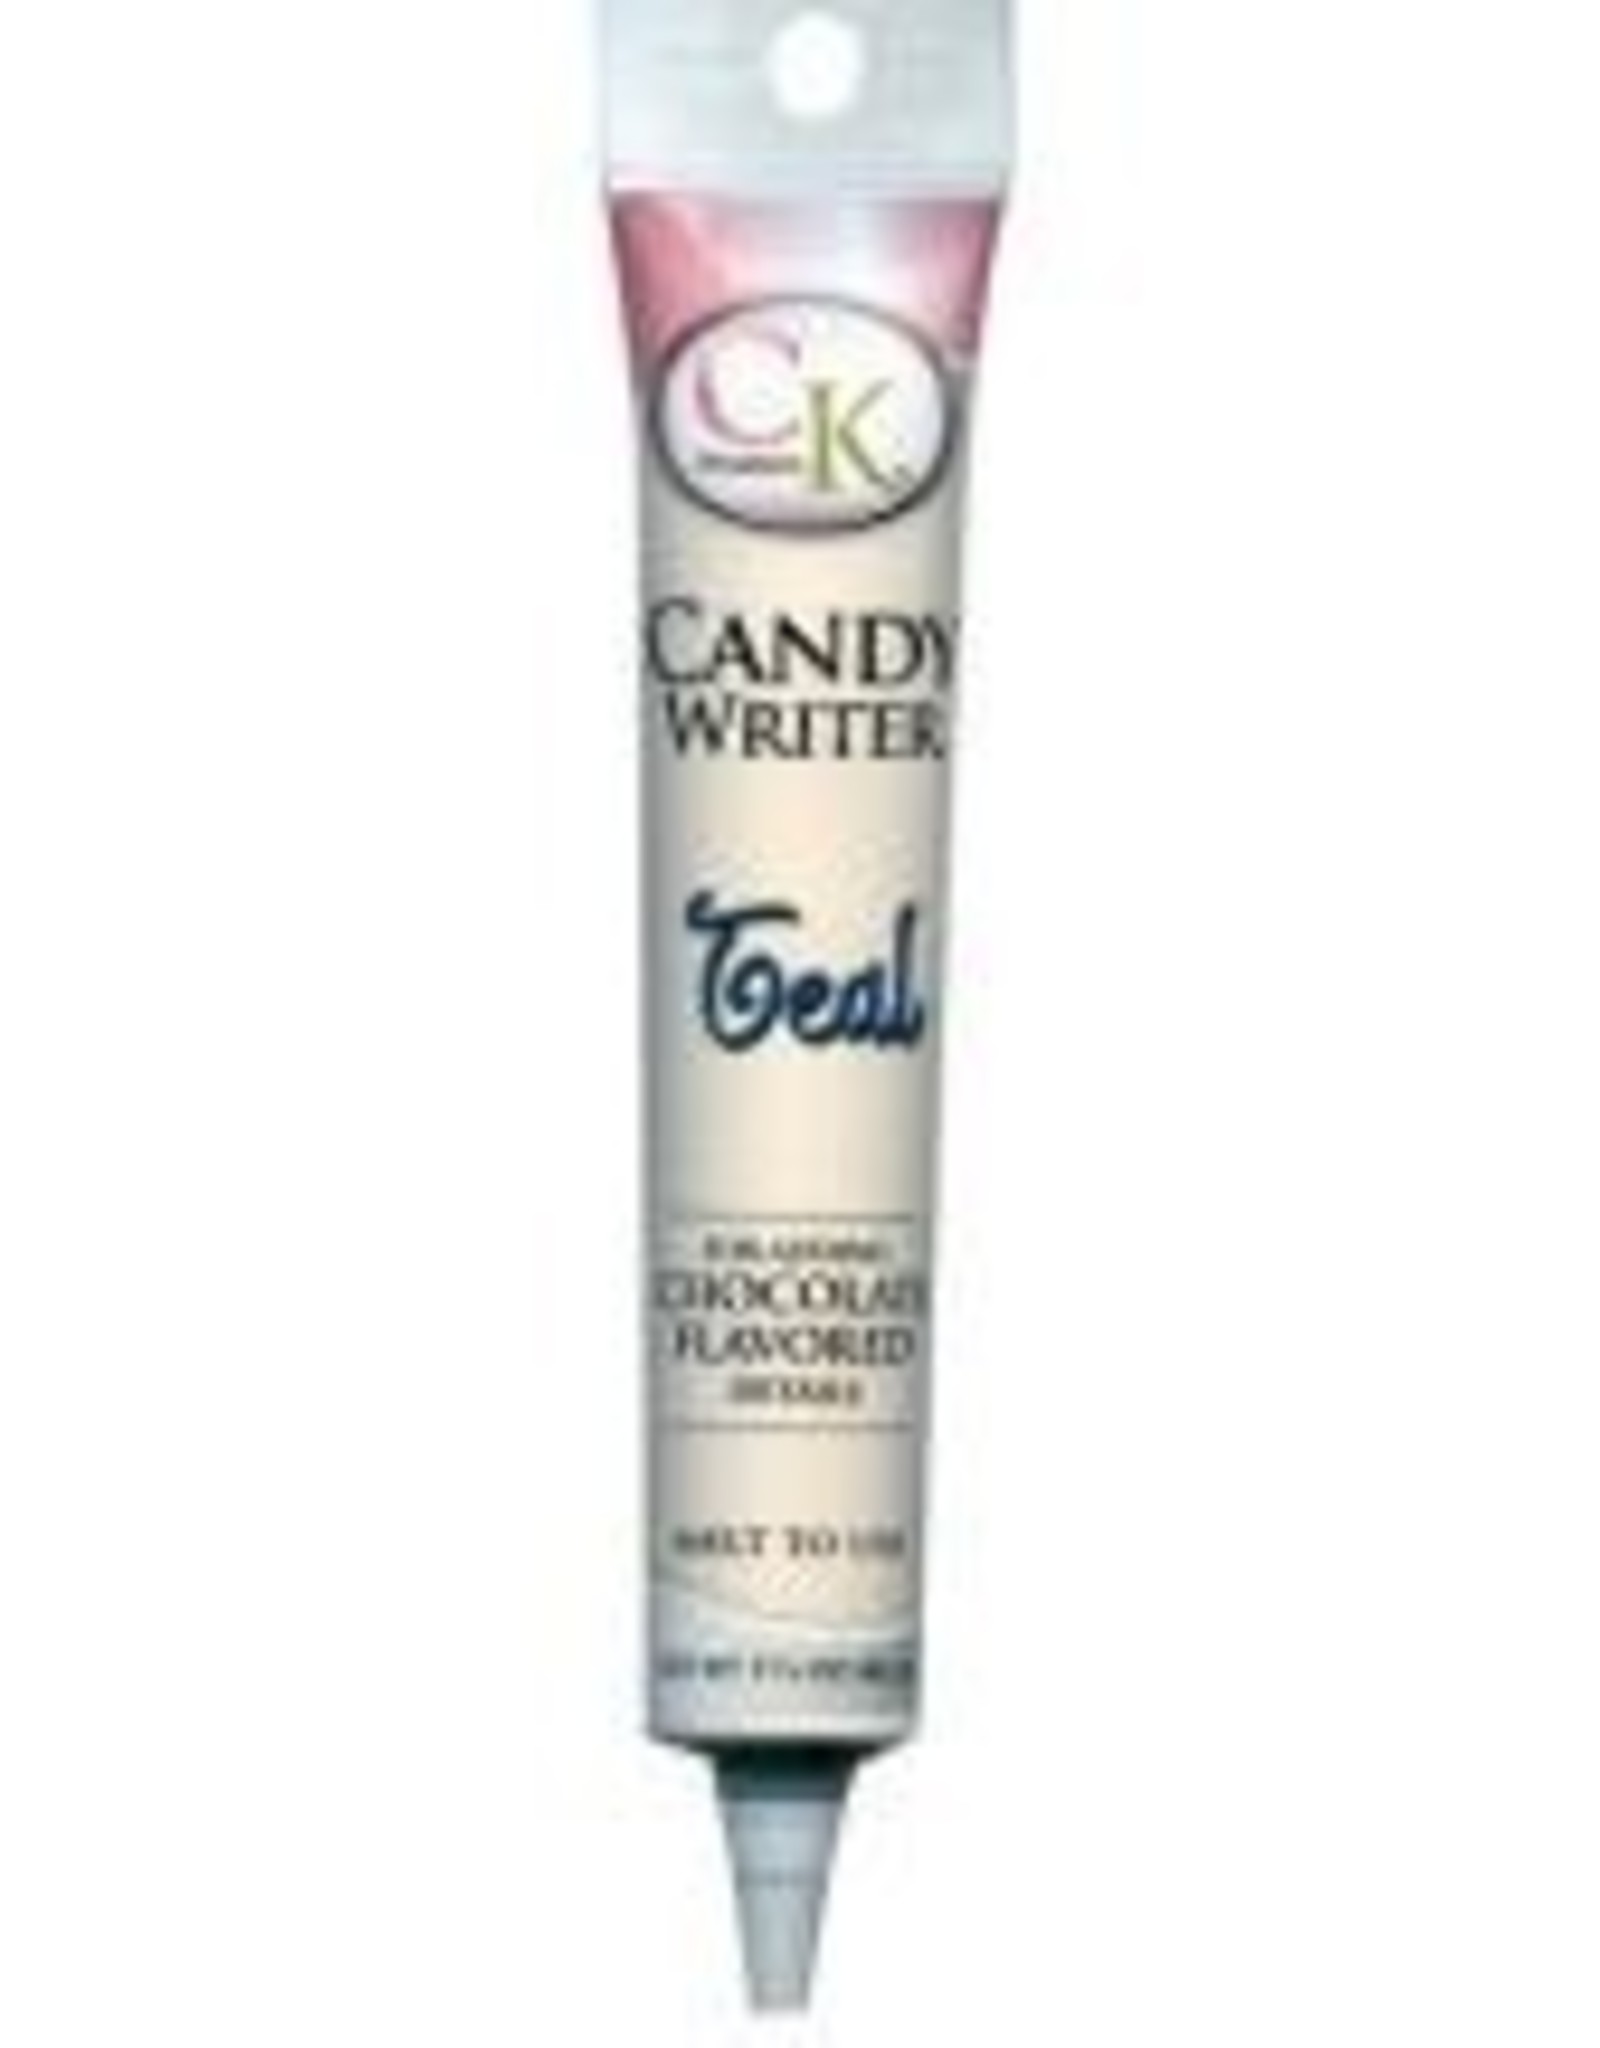 Candy Writer (Teal)